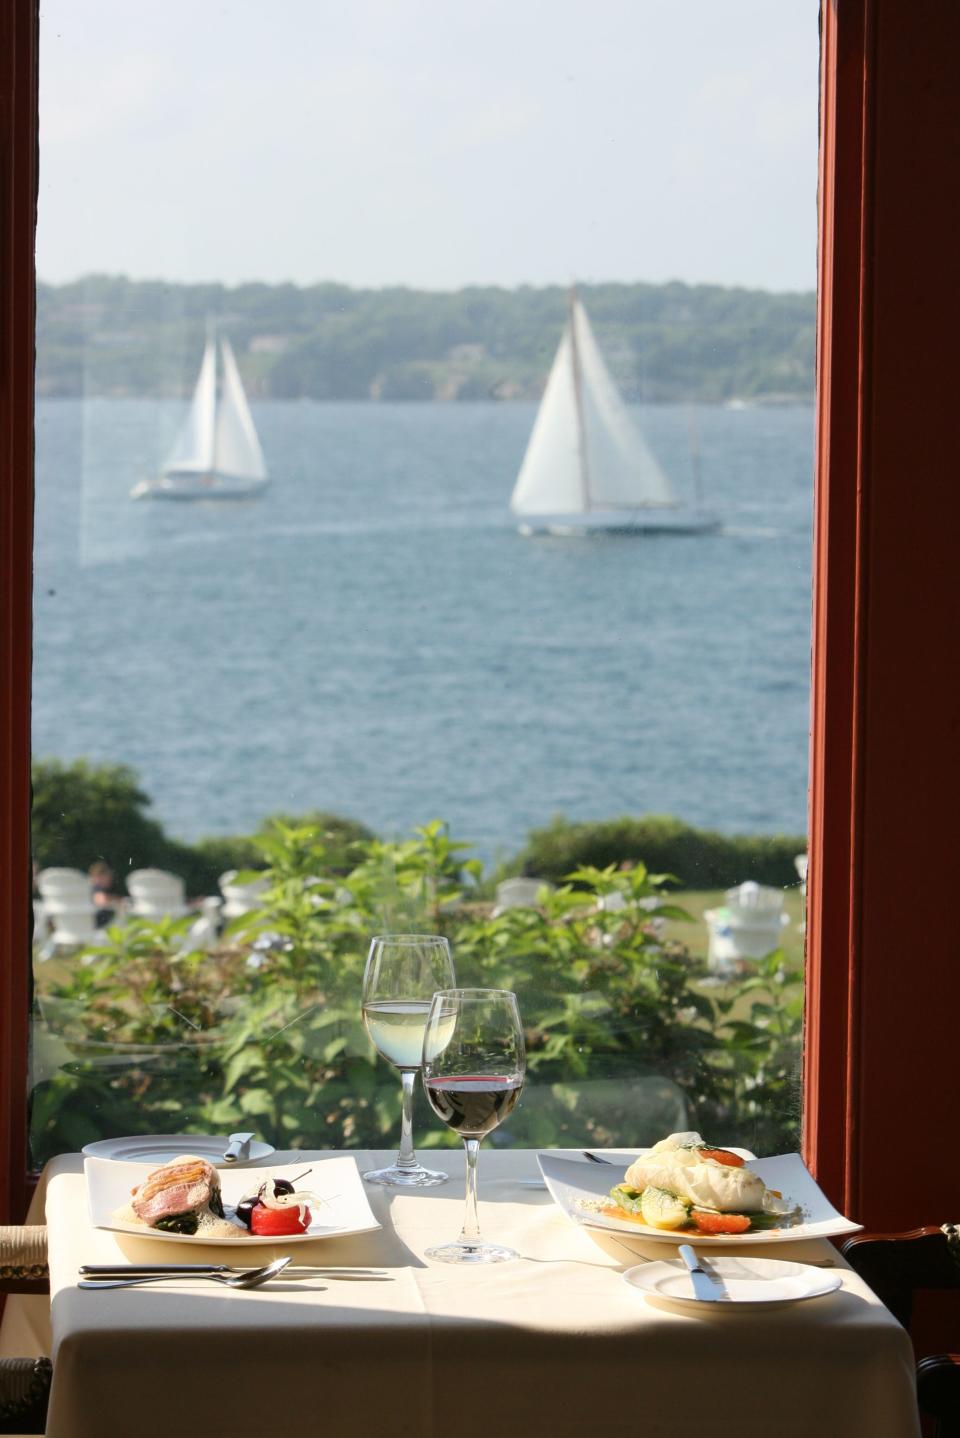 Newport's Castle Hill Inn offers sweeping views of Narragansett Bay while you're dining or sipping a drink out on the lawn.